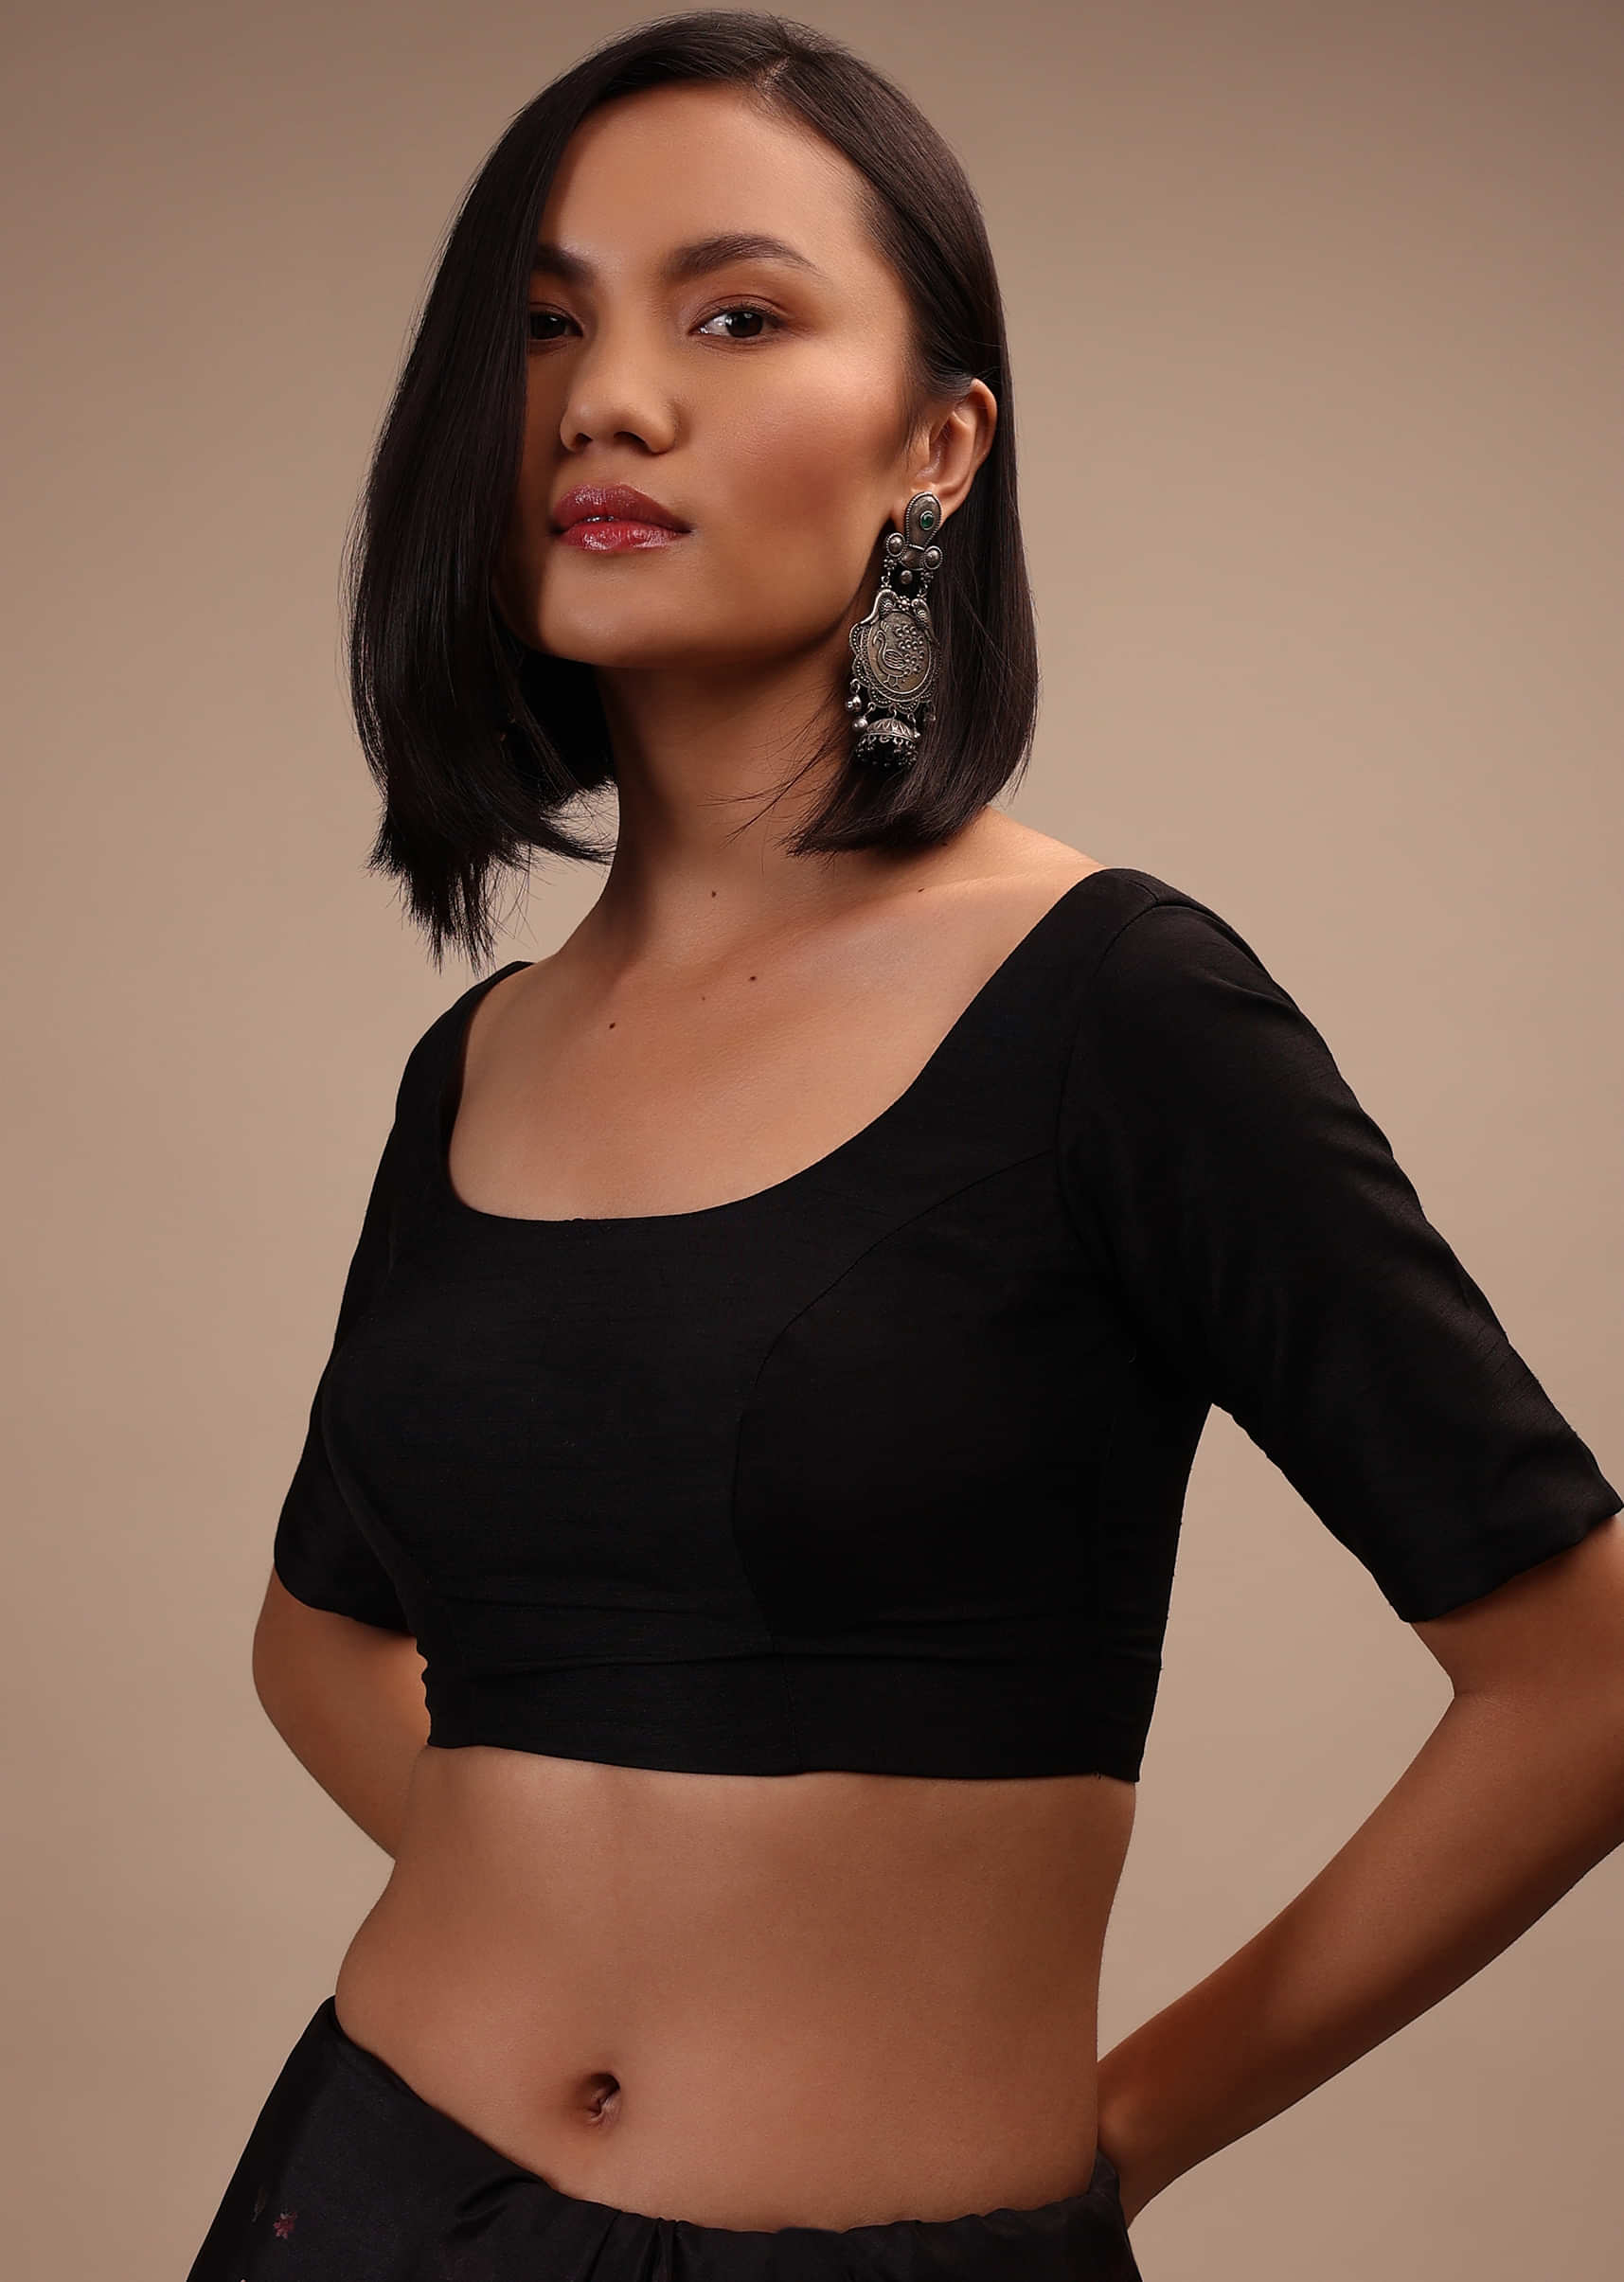 Black Half-Sleeveless Blouse In Scallop Neckline Raw Silk With Back Hook Closure.Padded With A Straight  Hemline